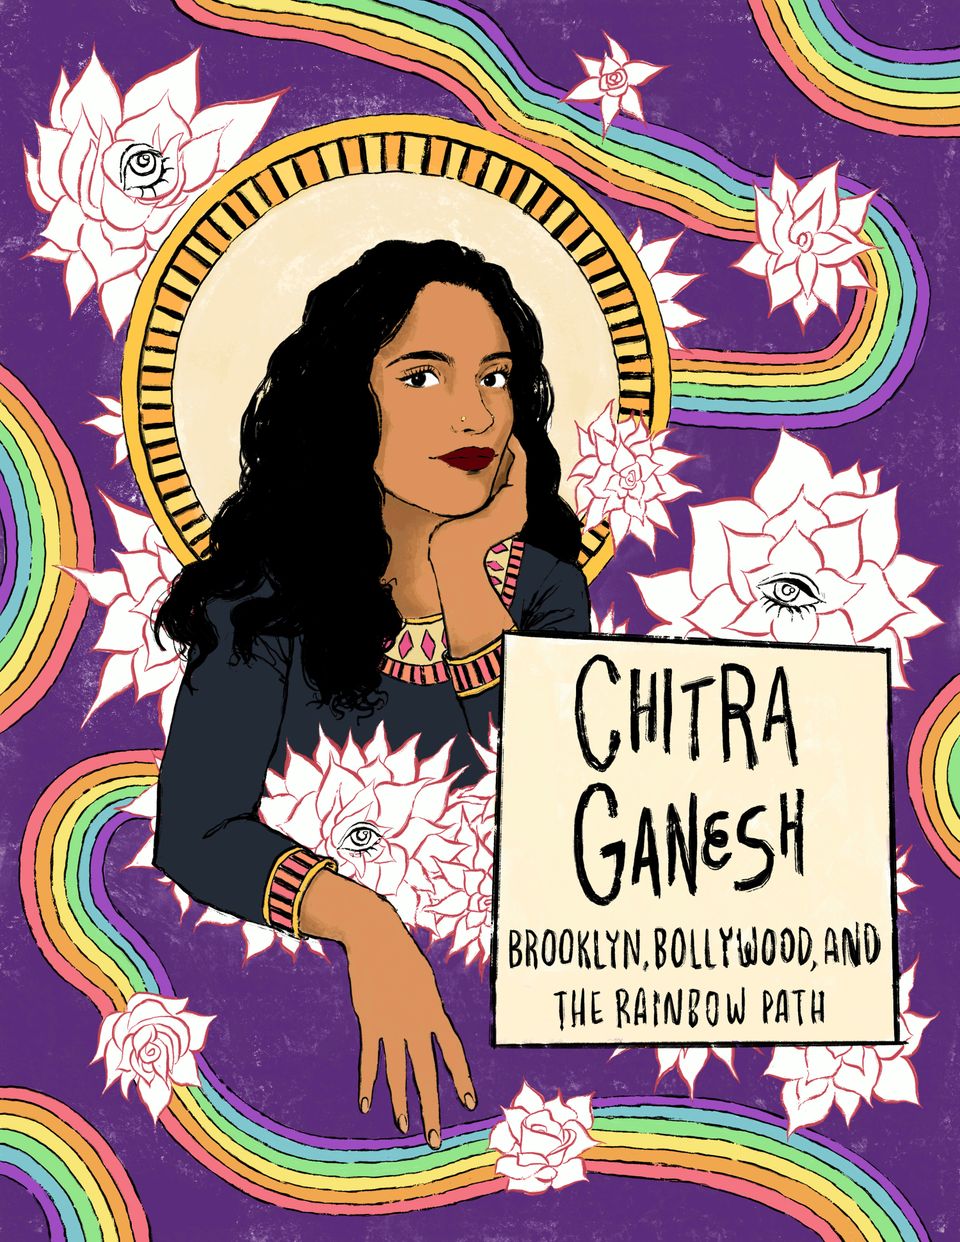 Chitra Ganesh emerges from white flowers set against a purple background with rainbows swirling throughout. Text reads: "Chitra Ganesh: Brooklyn, Bollywood, and the Rainbow Path."